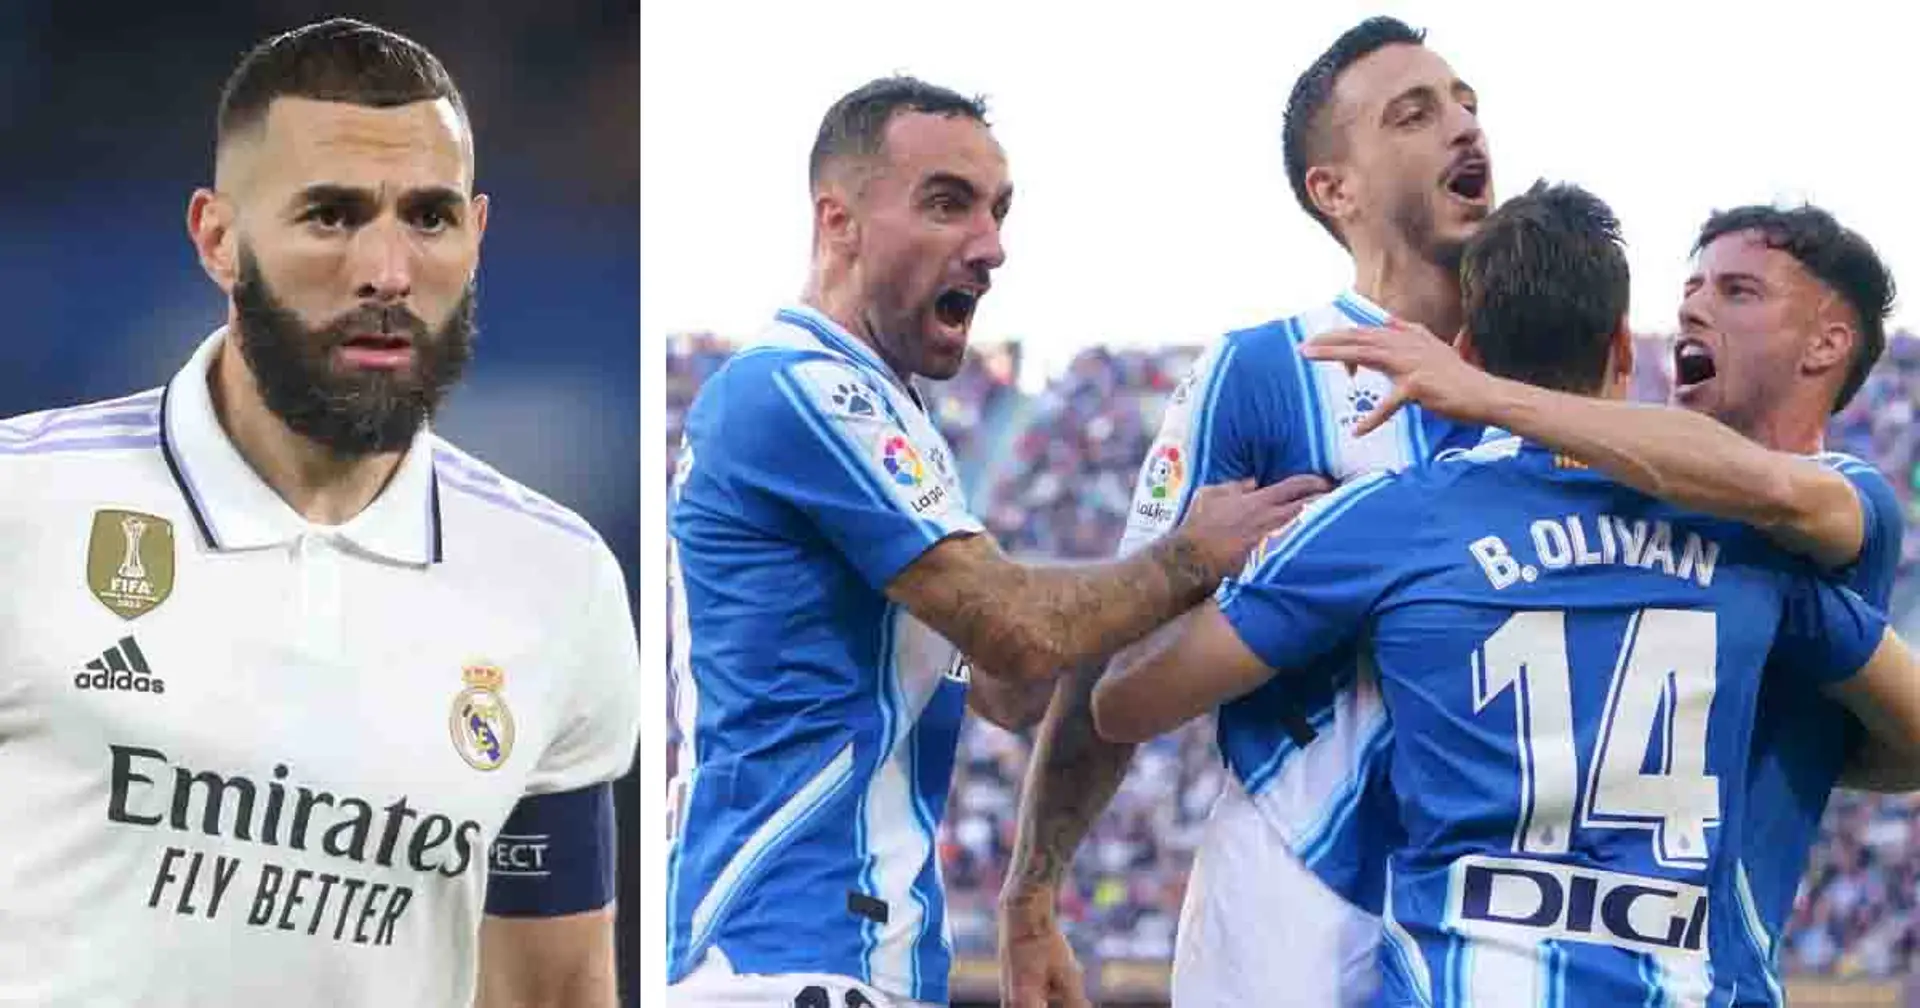 Real Madrid keen on signing one La Liga striker as Benzema back-up – he’s Carvajal’s brother-in-law (reliability: 5 stars)